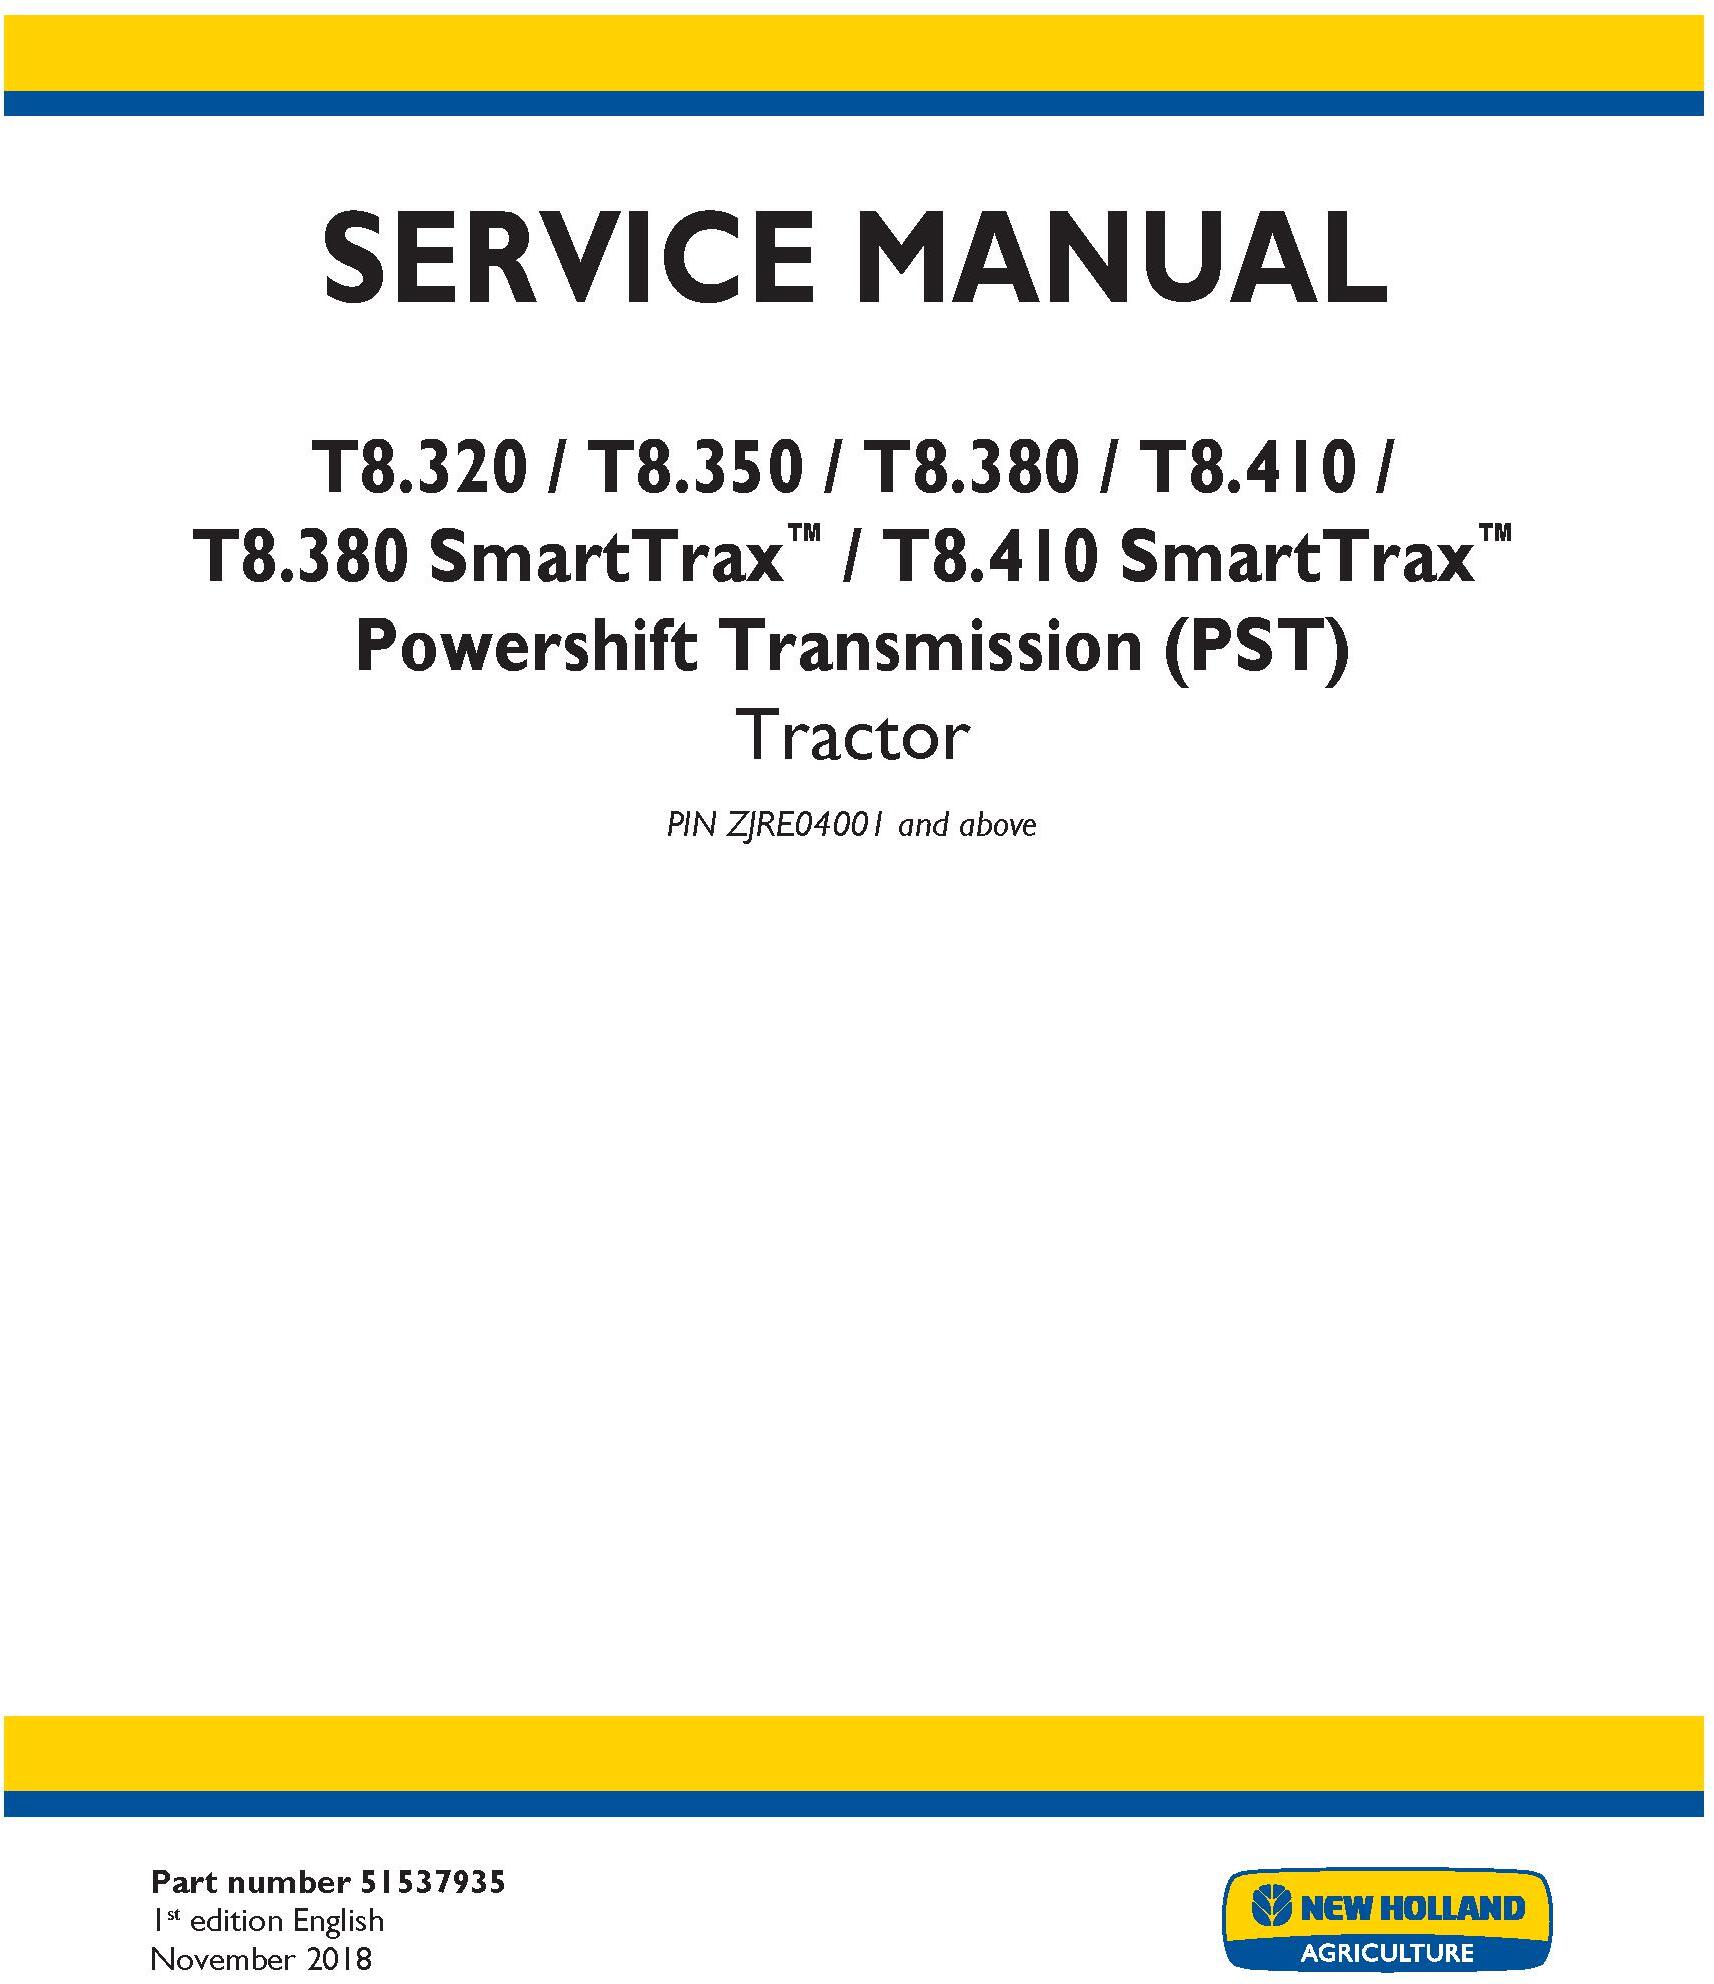 New Holland T8.320, T8.350, T8.380, T8.410 and SmartTrax PST Tier 4B Tractor Service Manual - 19529